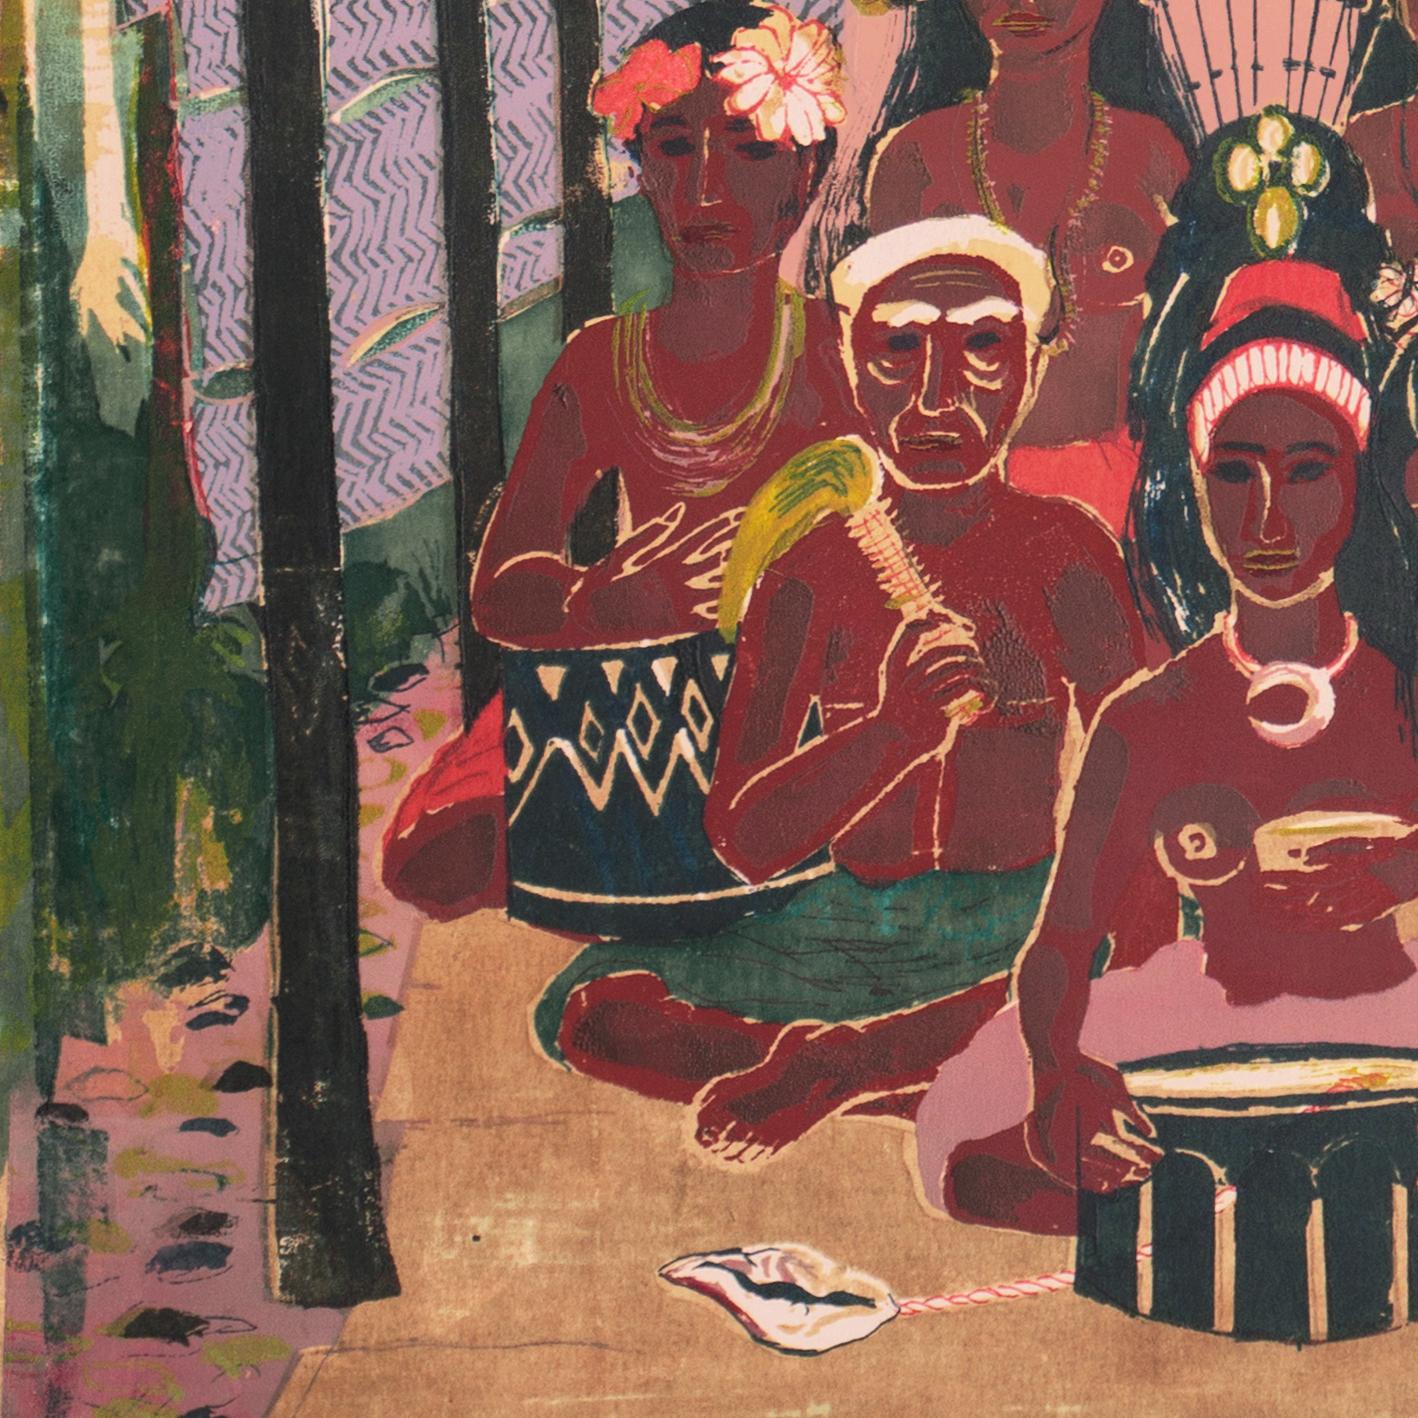 Stamped, verso, with certification of authenticity for 'Marion Cunningham' (American, 1908-1948) and created in 1948.
Paper dimensions: 17.75 x 16 inches

A substantial and rare, mid-century silkscreen showing a Hawaiian family seated beneath a